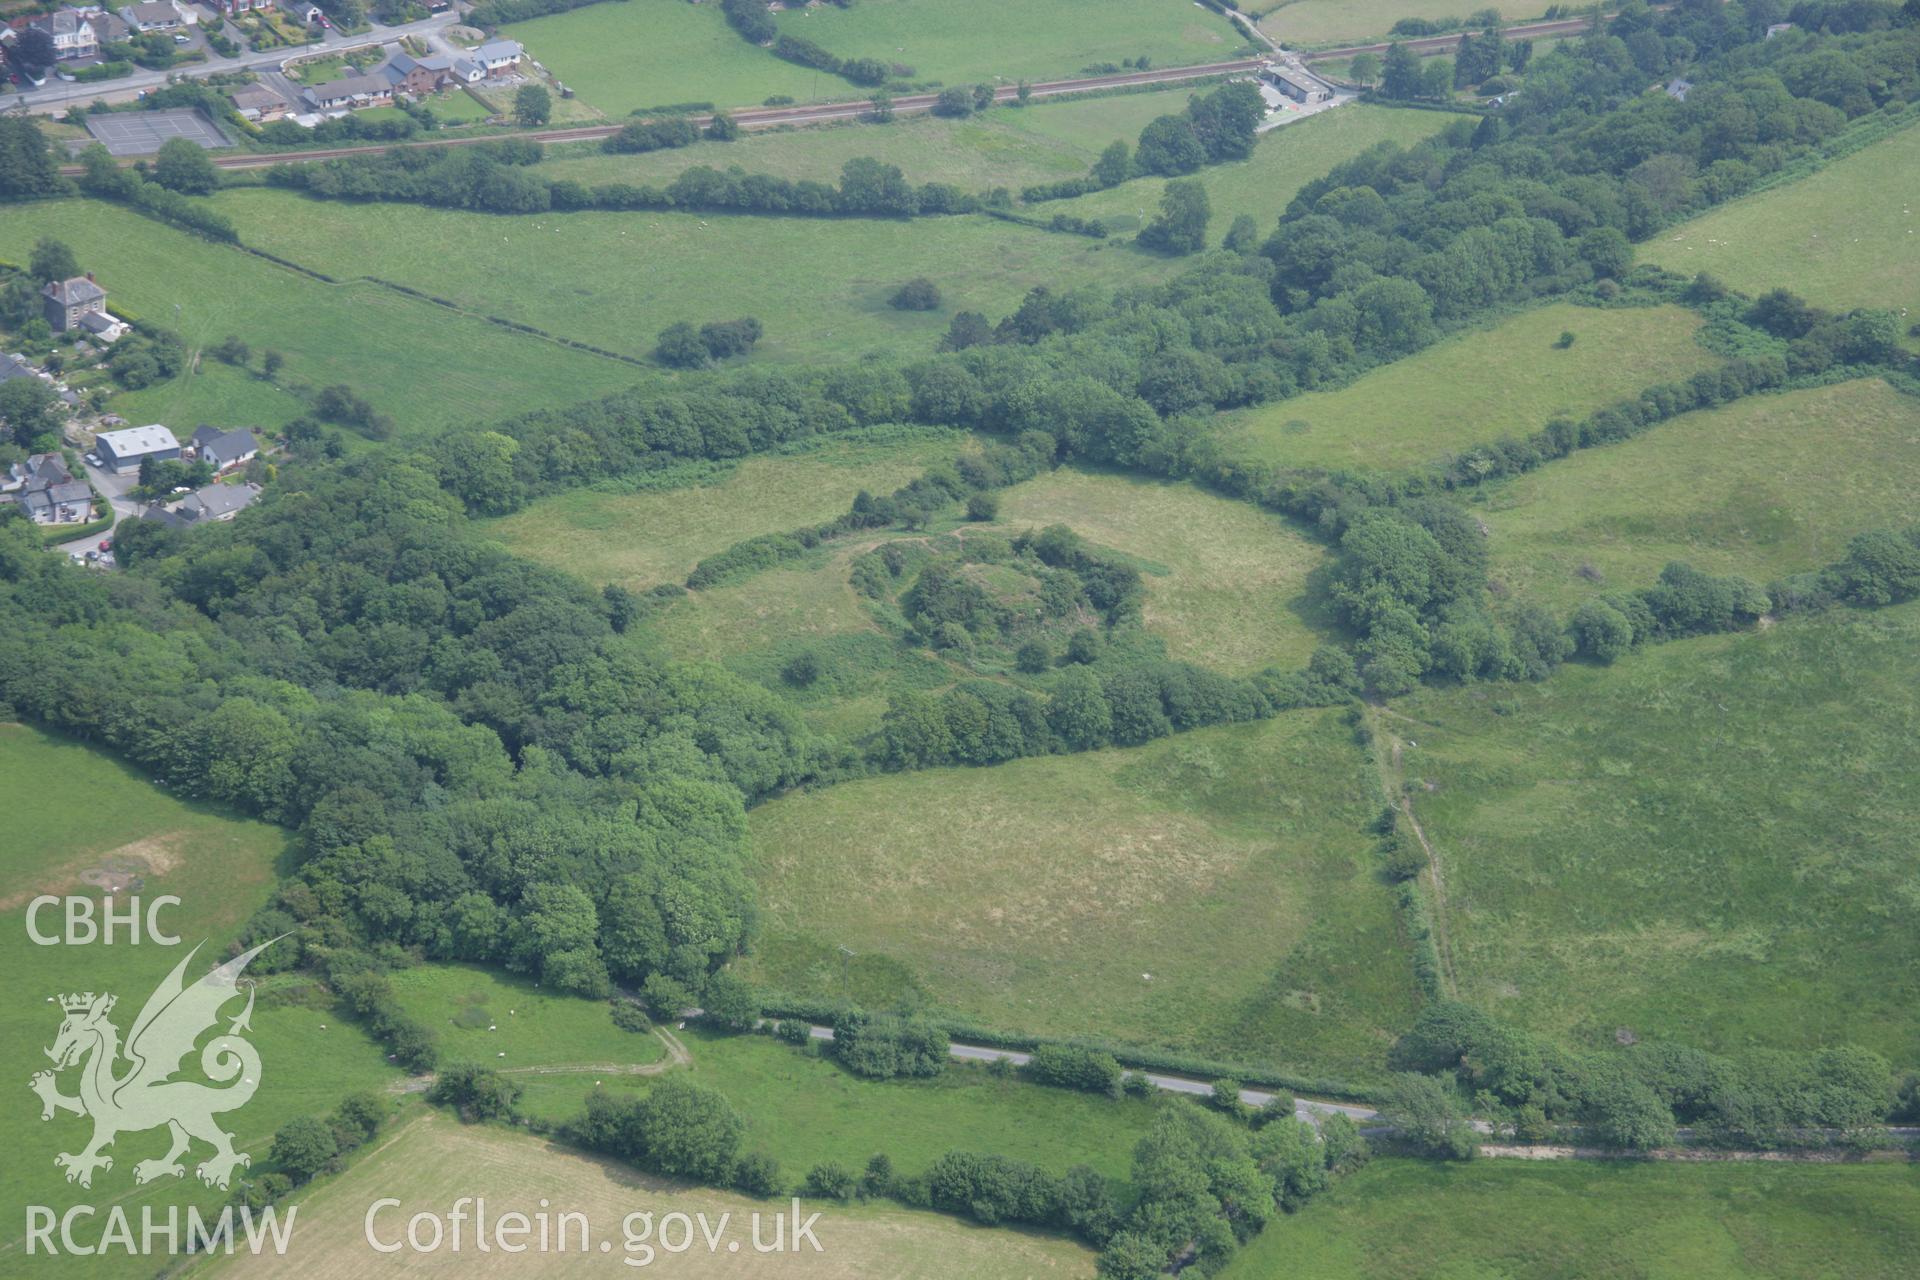 RCAHMW colour oblique aerial photograph of Castell Gwallter, Llandre. Taken on 04 July 2006 by Toby Driver.